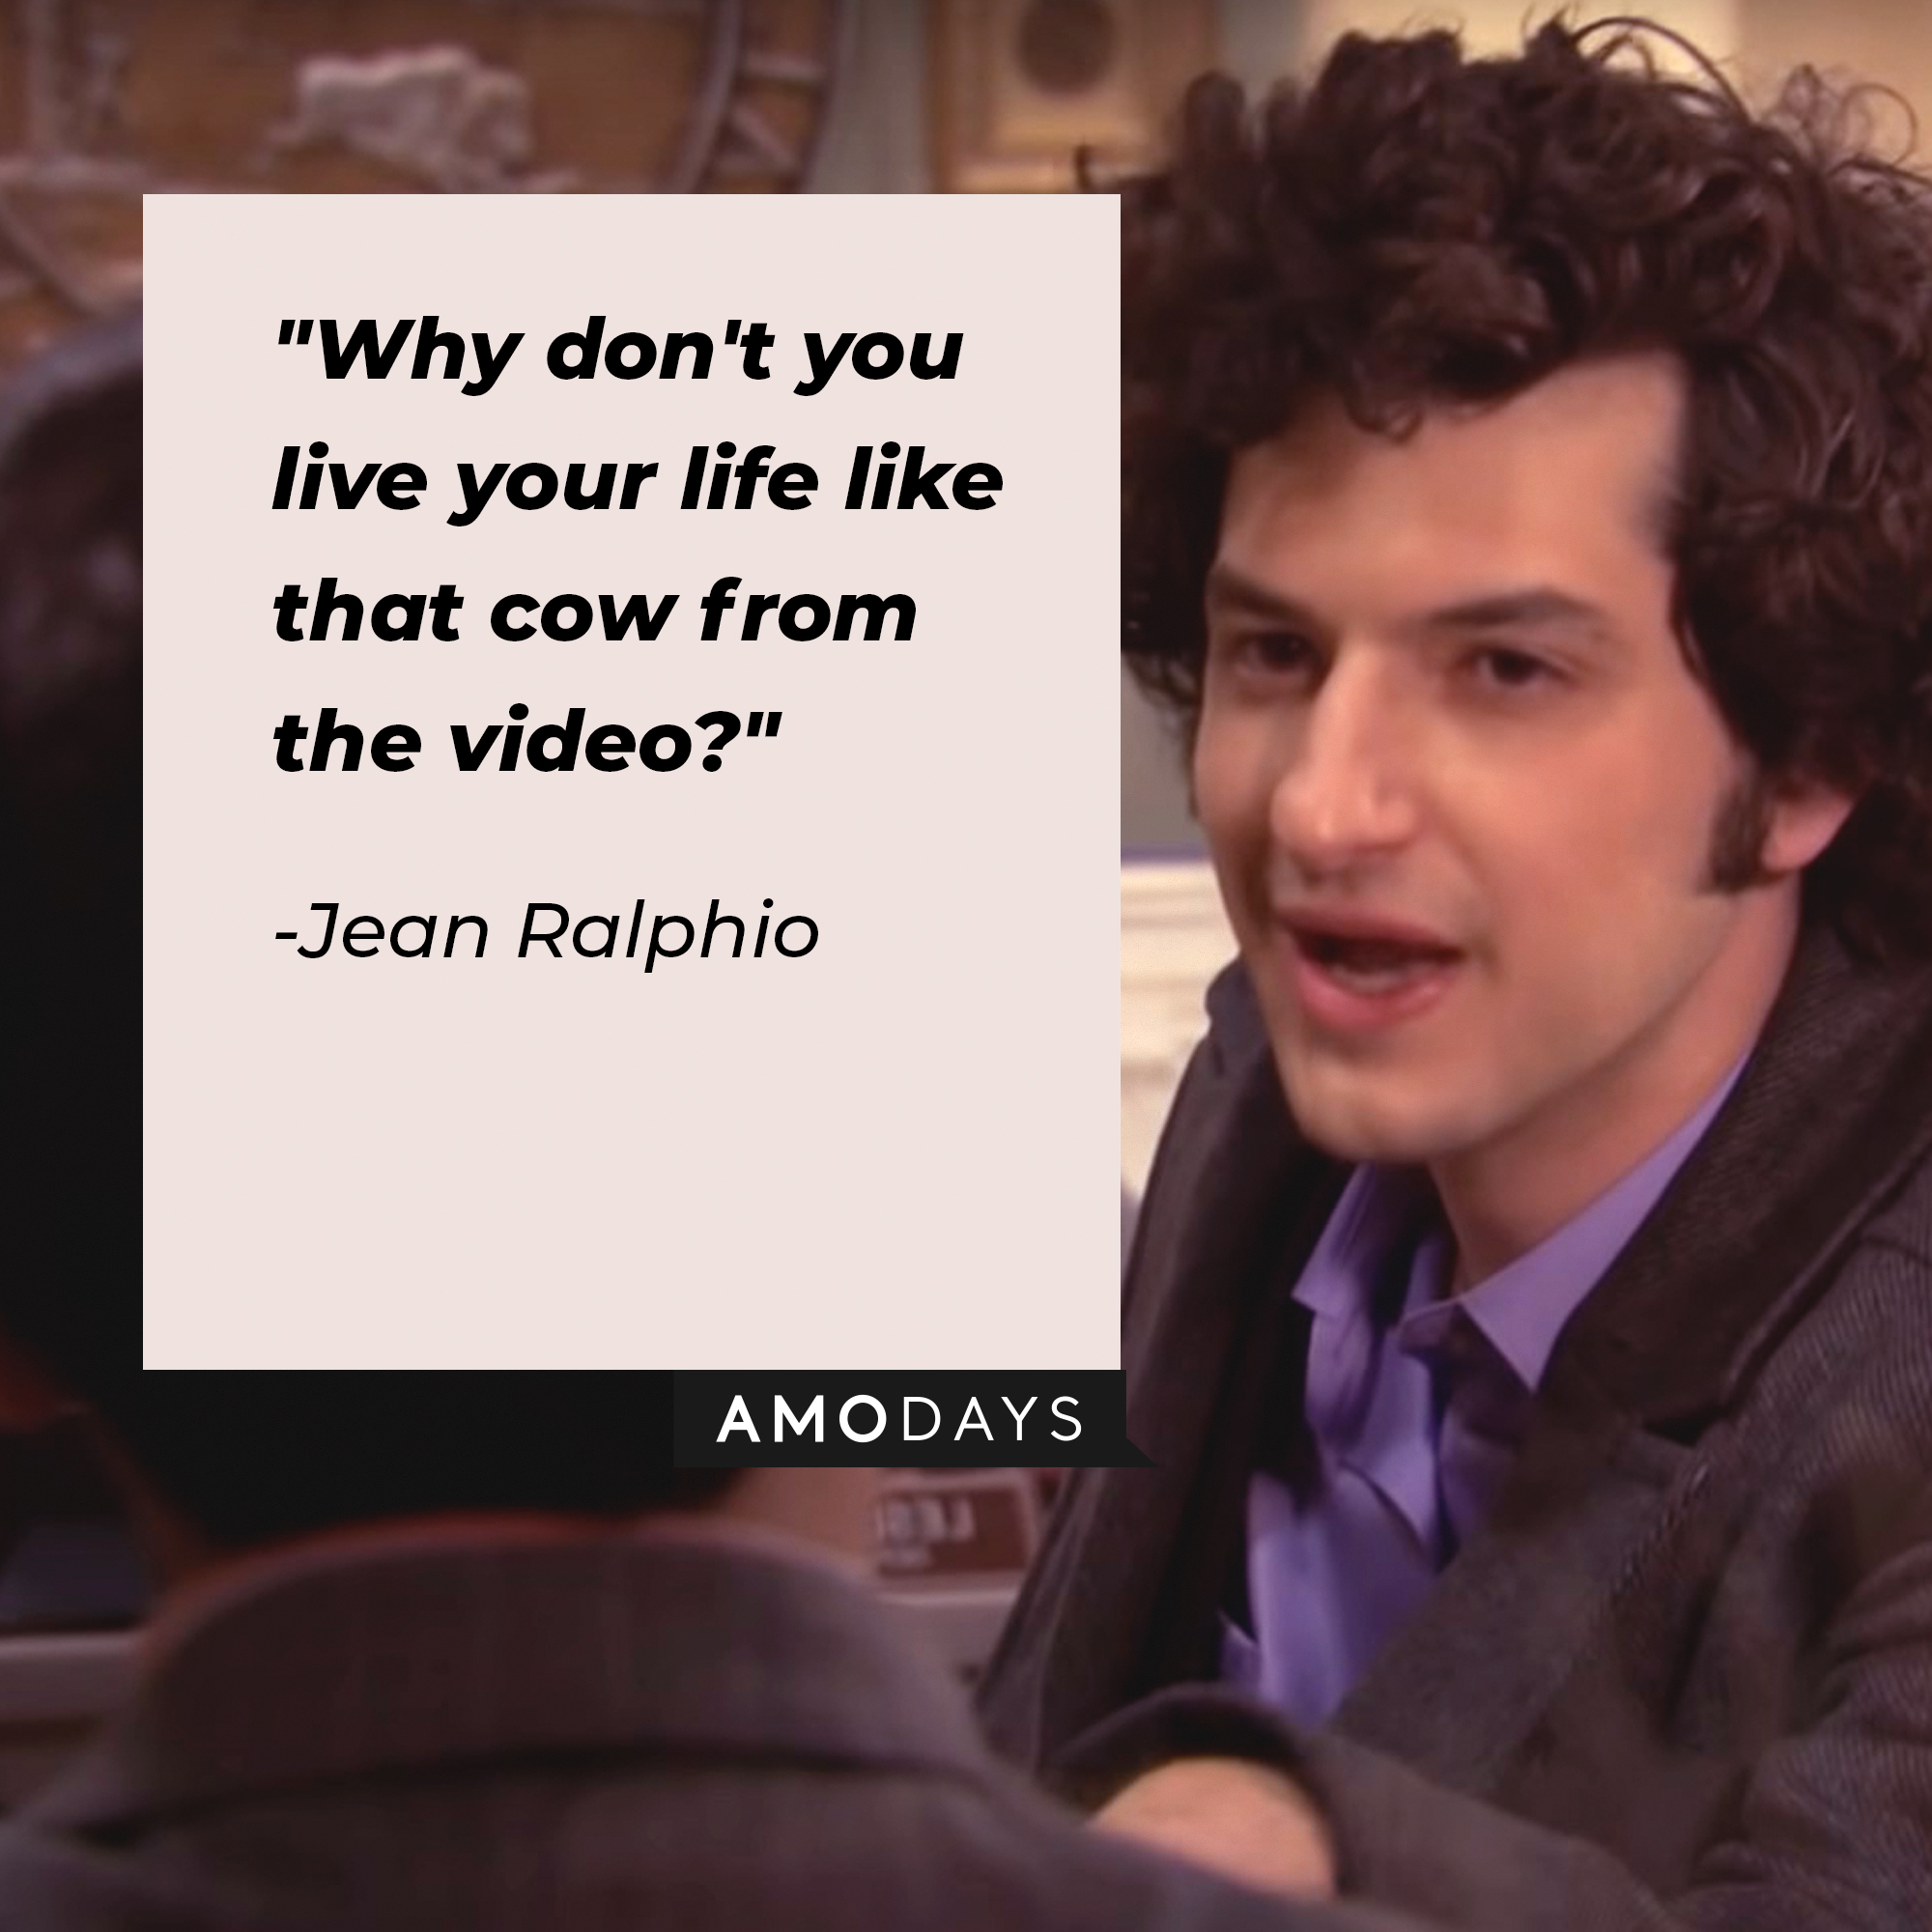 Jean Ralphio's quote: "Why don't you live your life like that cow from the video?" | Source: Facebook.com/parksandrecreation